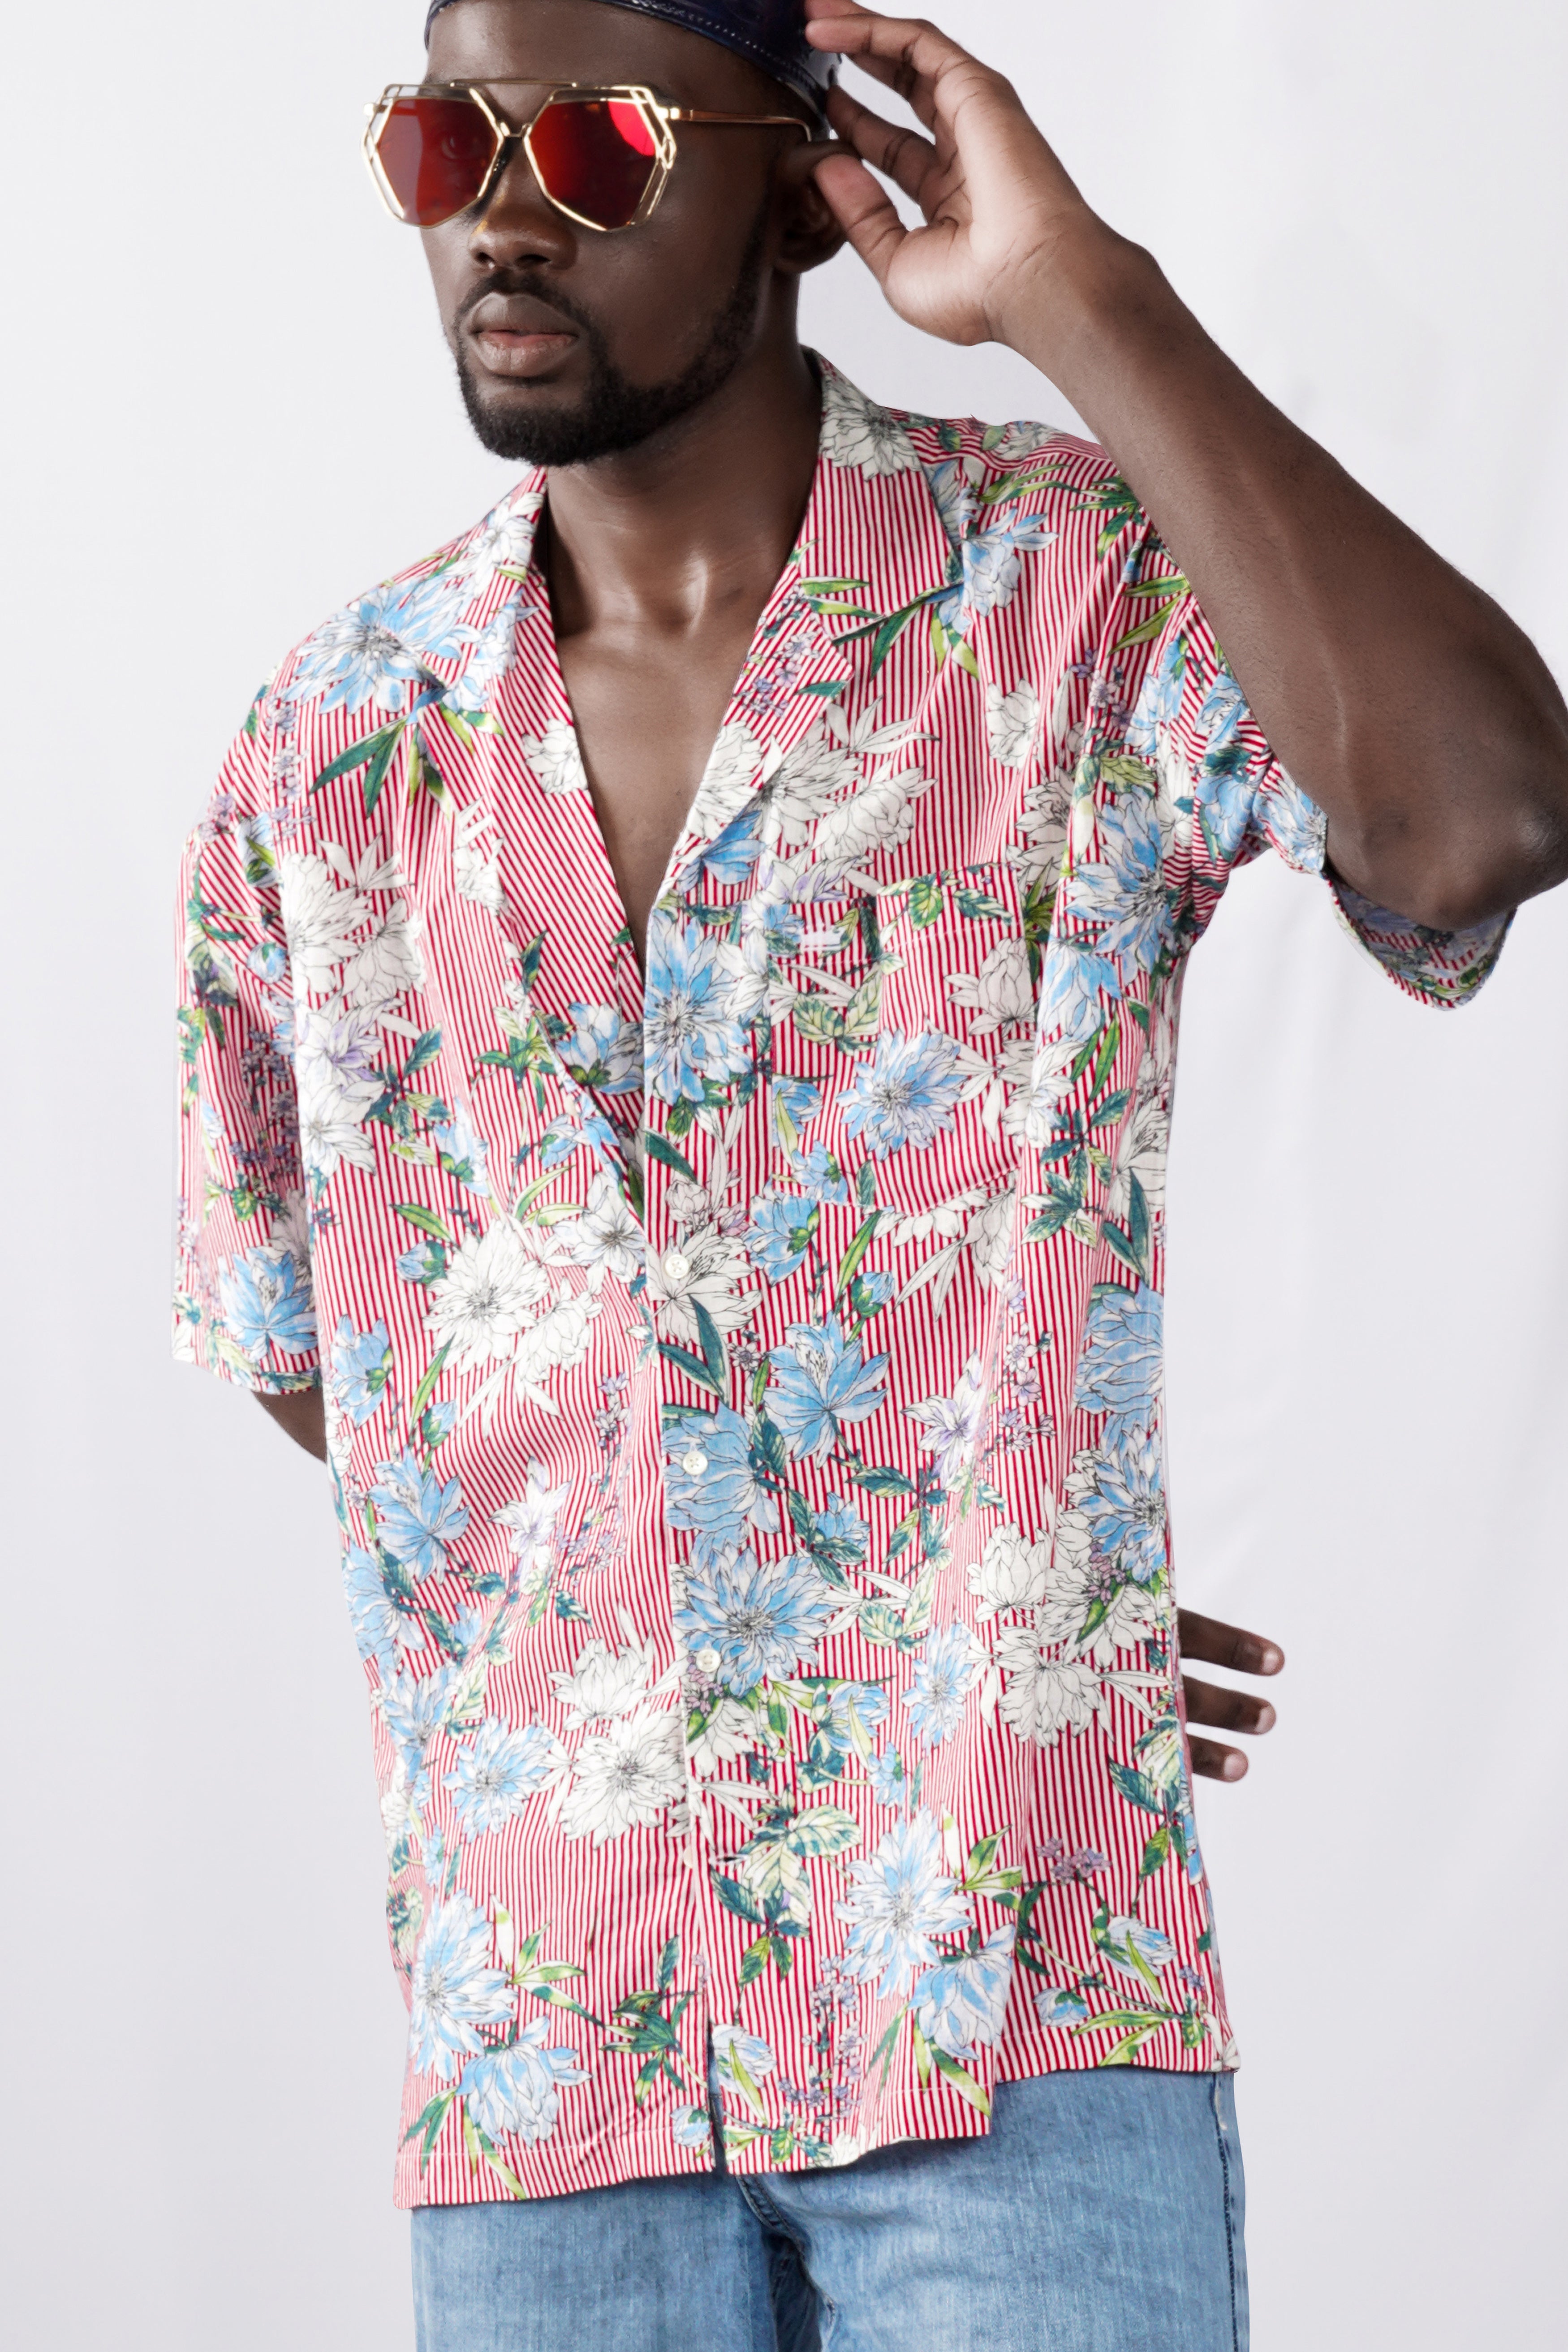 Rudy Red and White Floral Printed Lightweight Premium Cotton Oversized Shirt